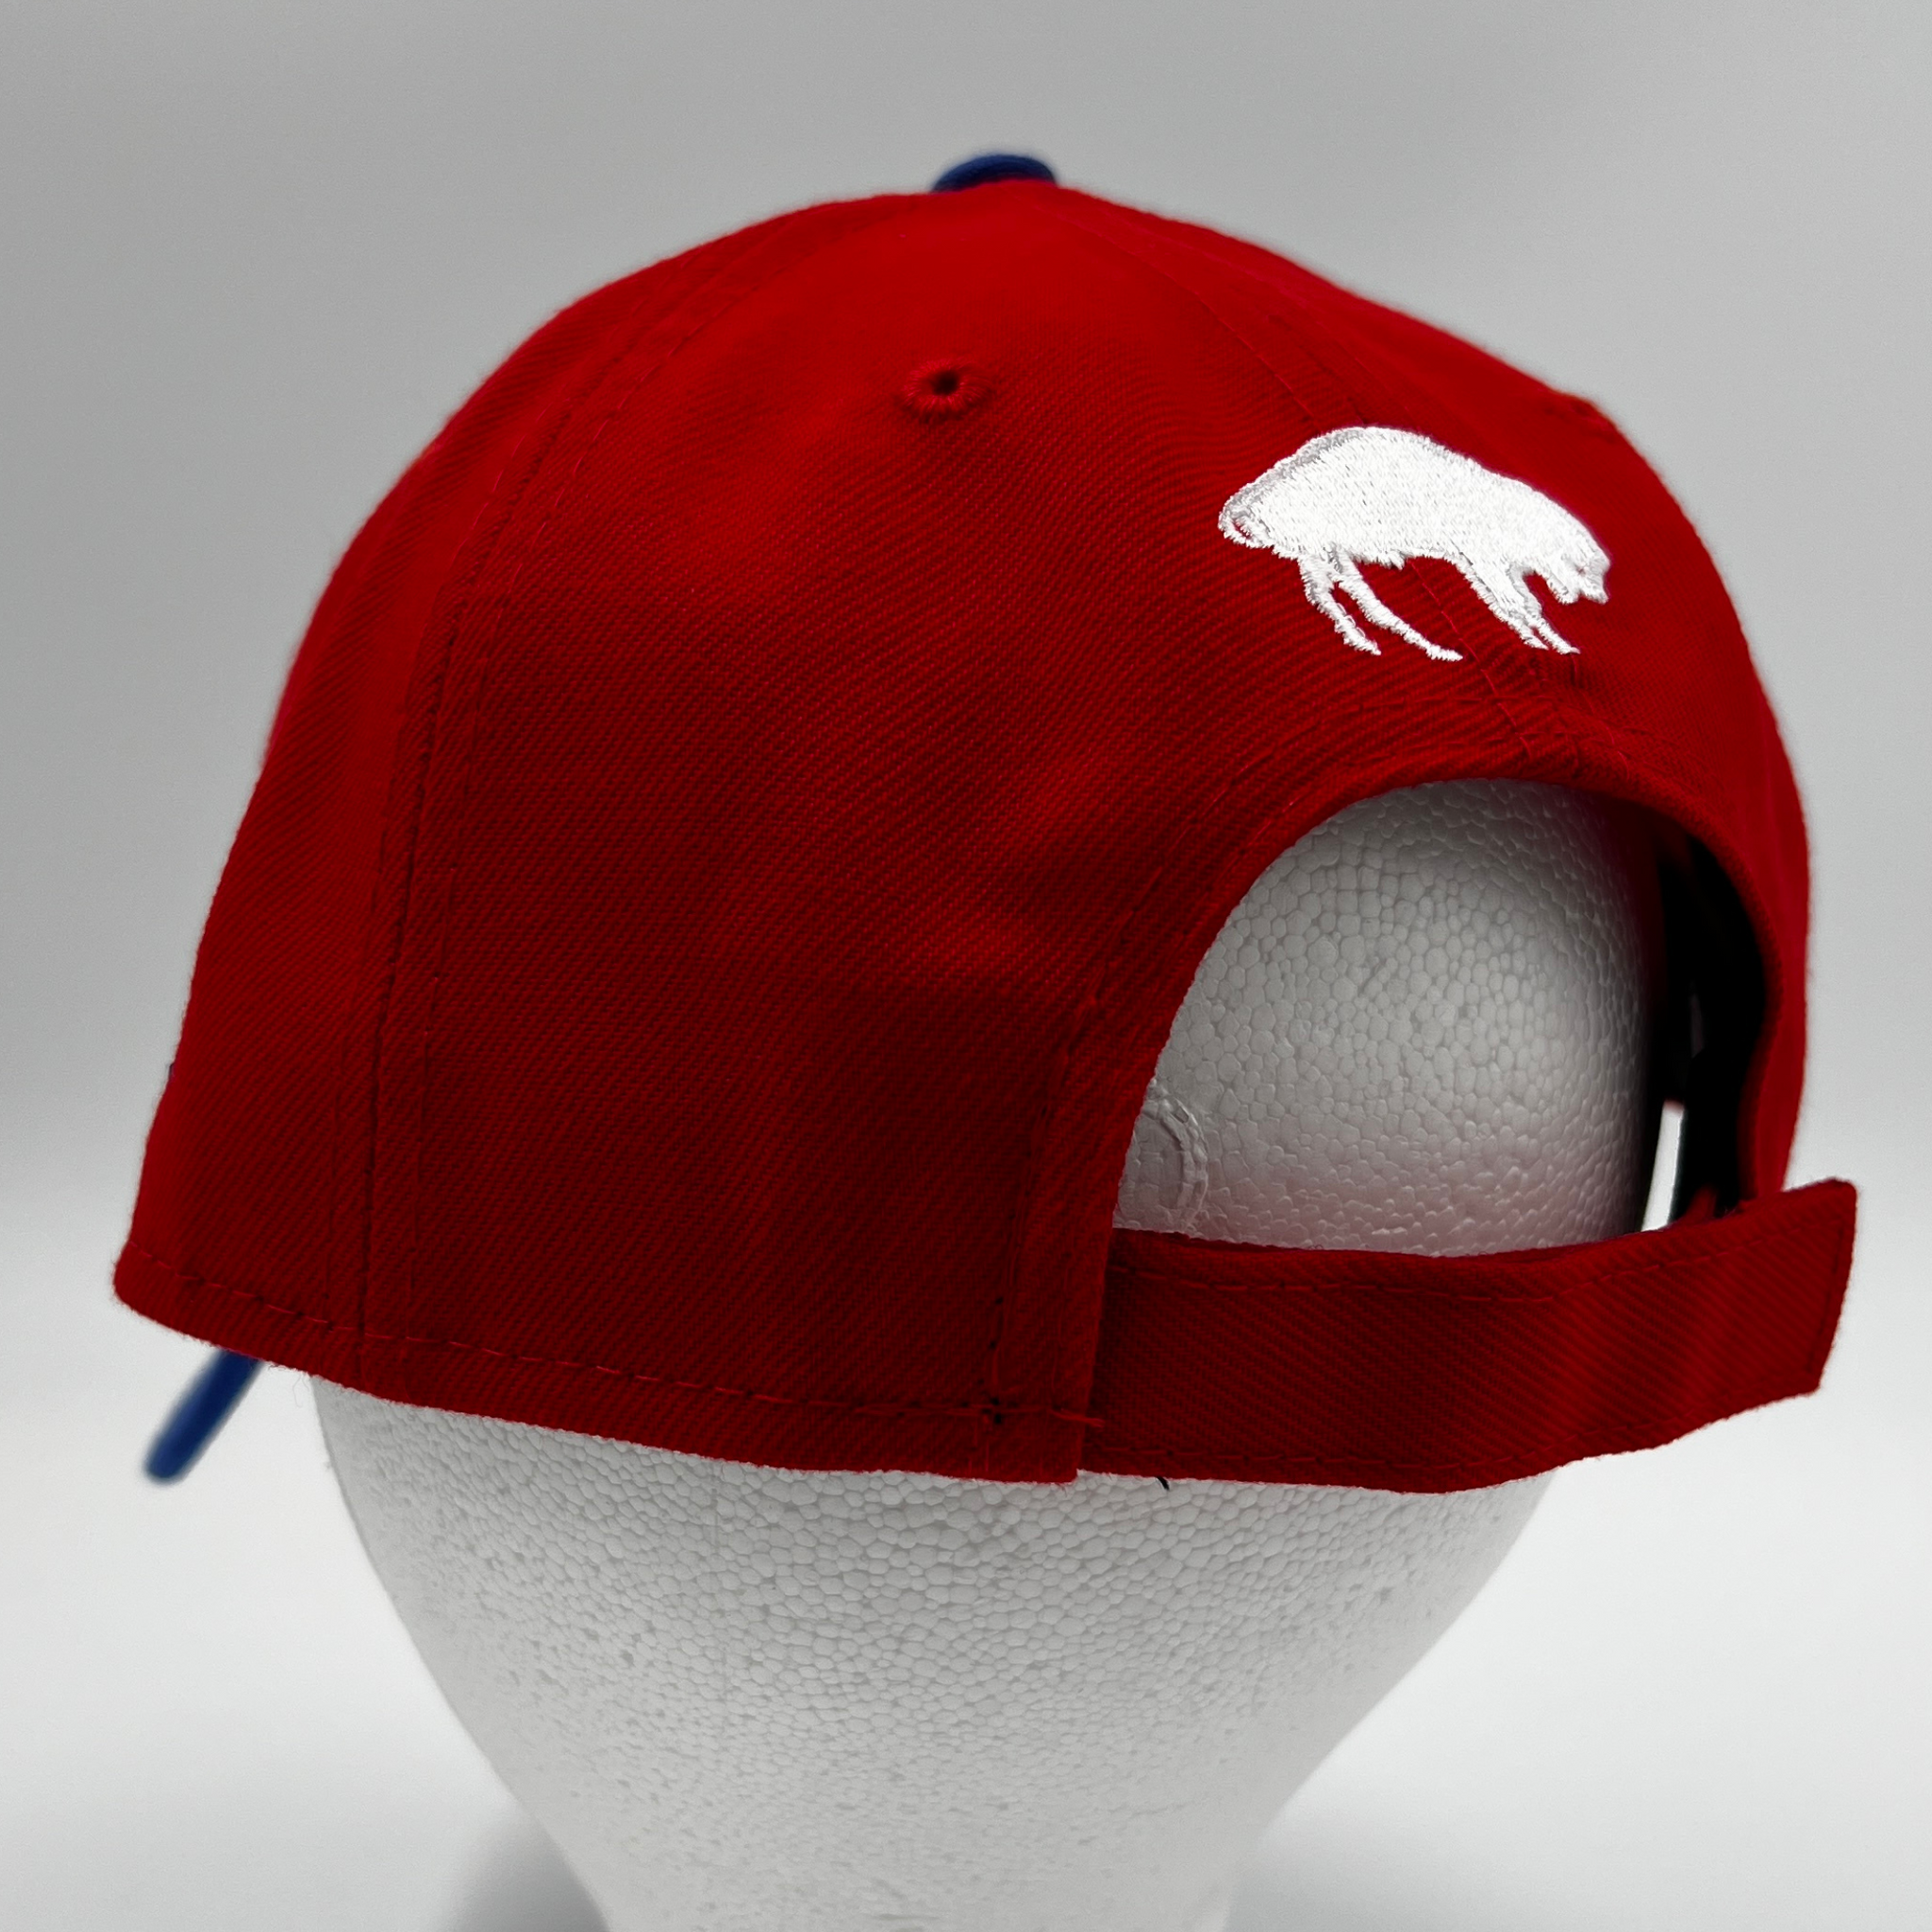 New Era Bills Red With Standing Buffalo Adjustable Hat